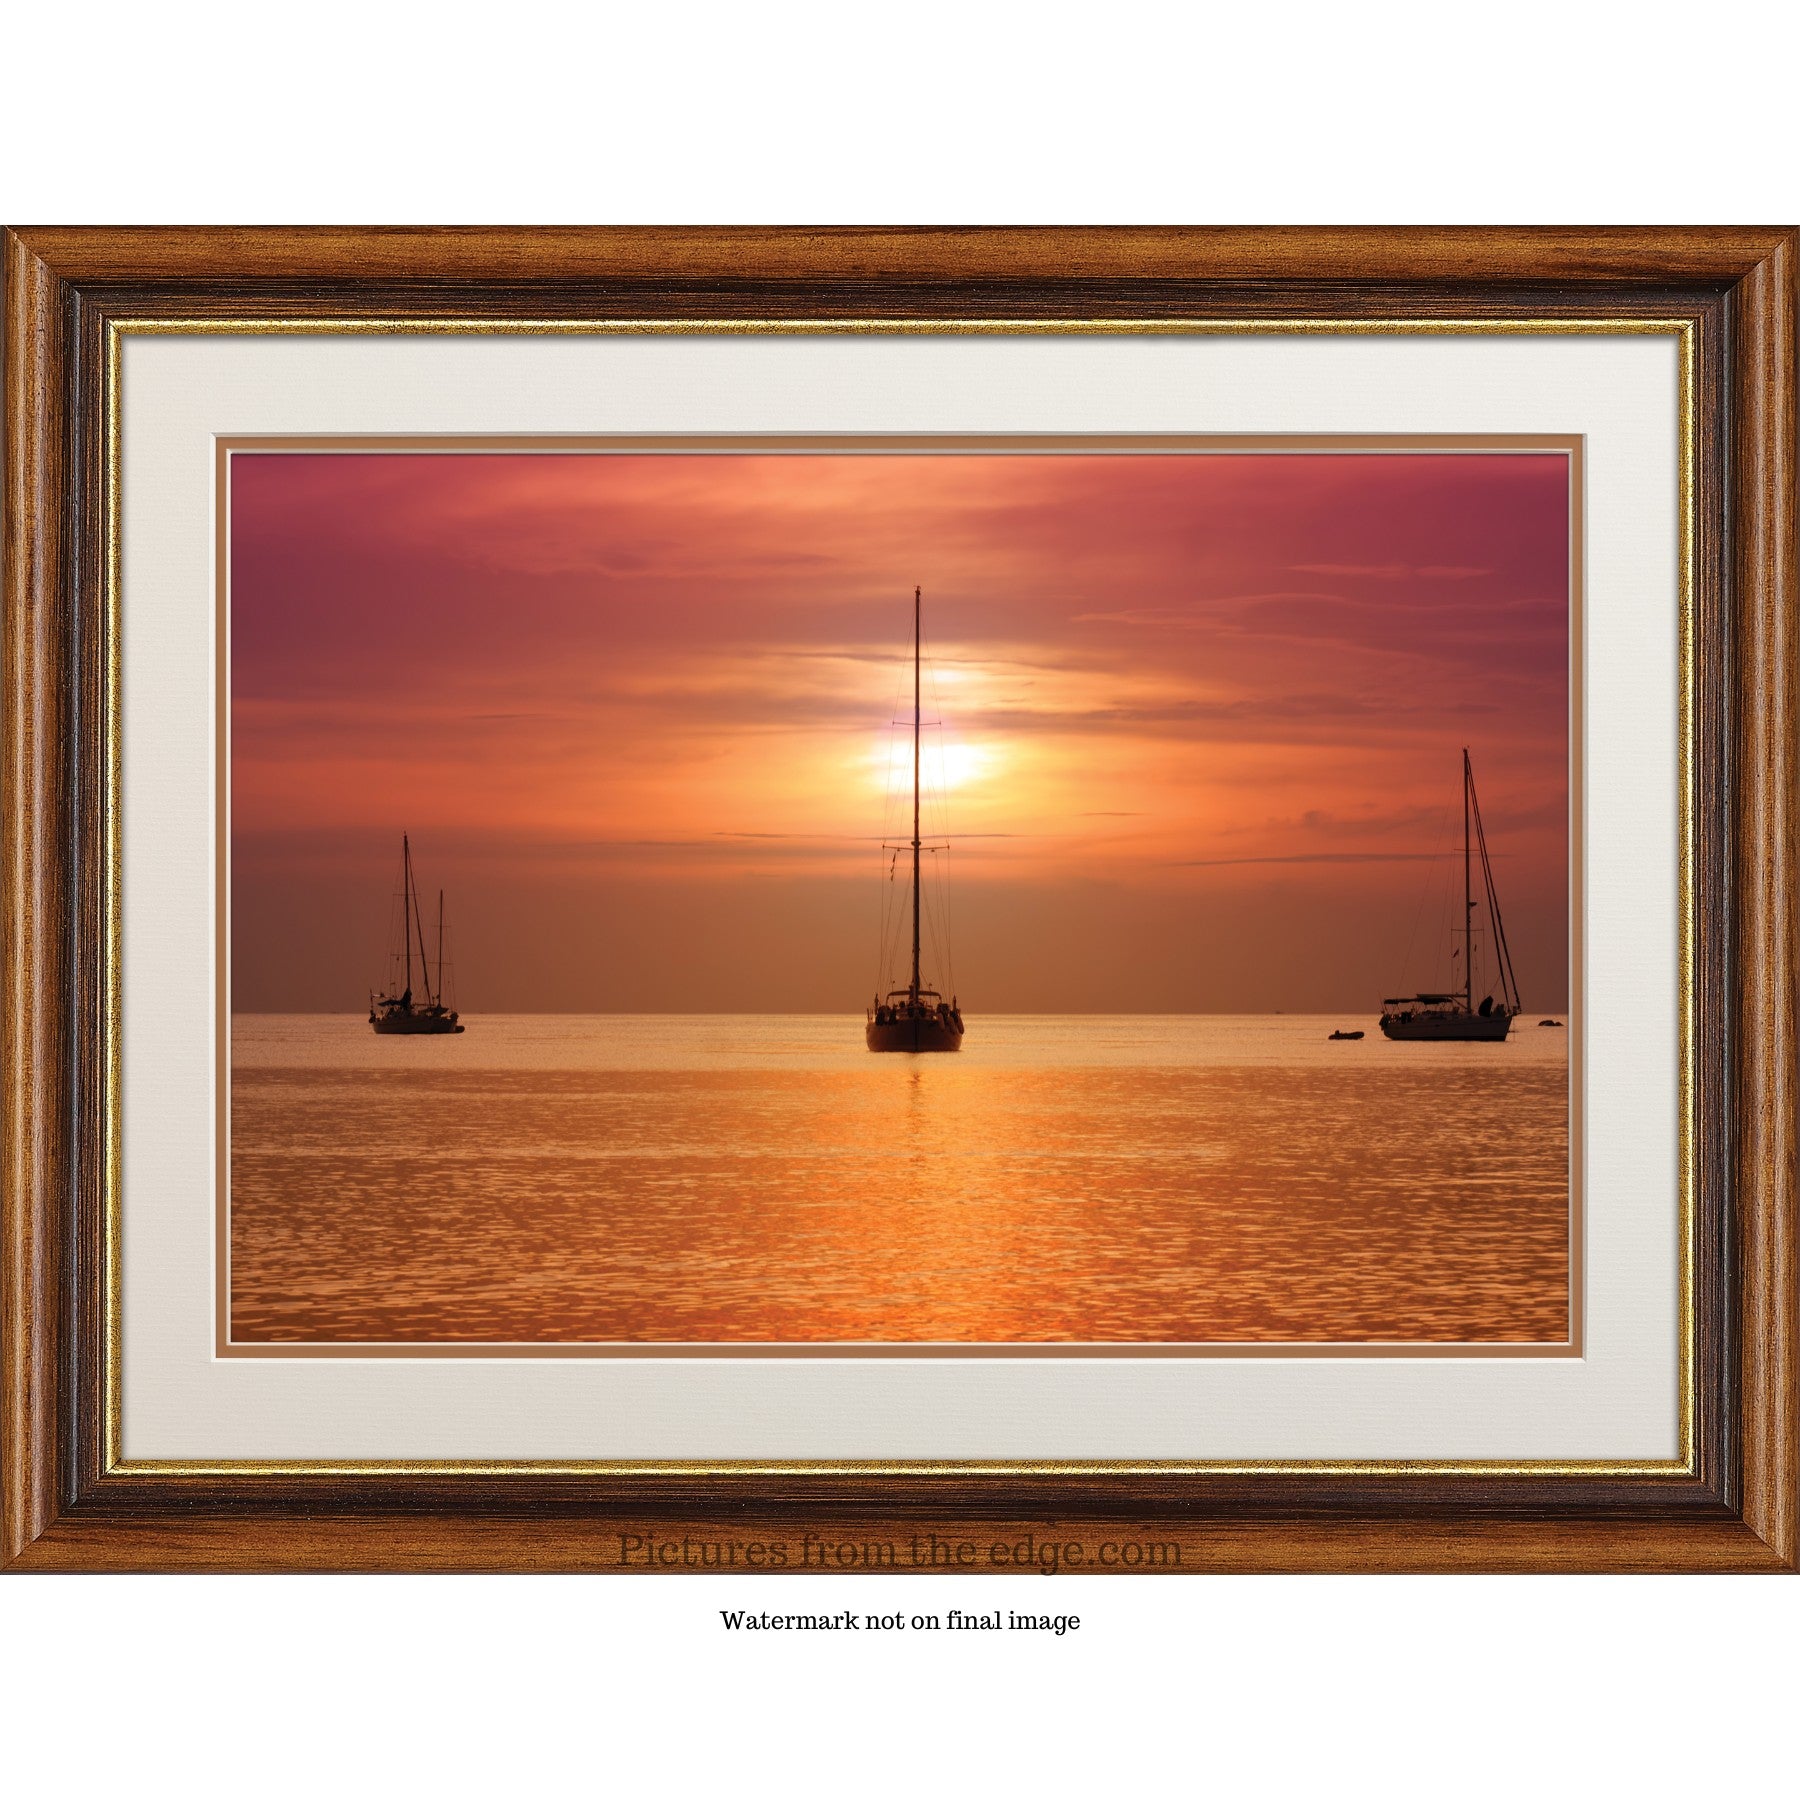 BeMoved by Sunset at Anchor Poster. Movable and Removable!